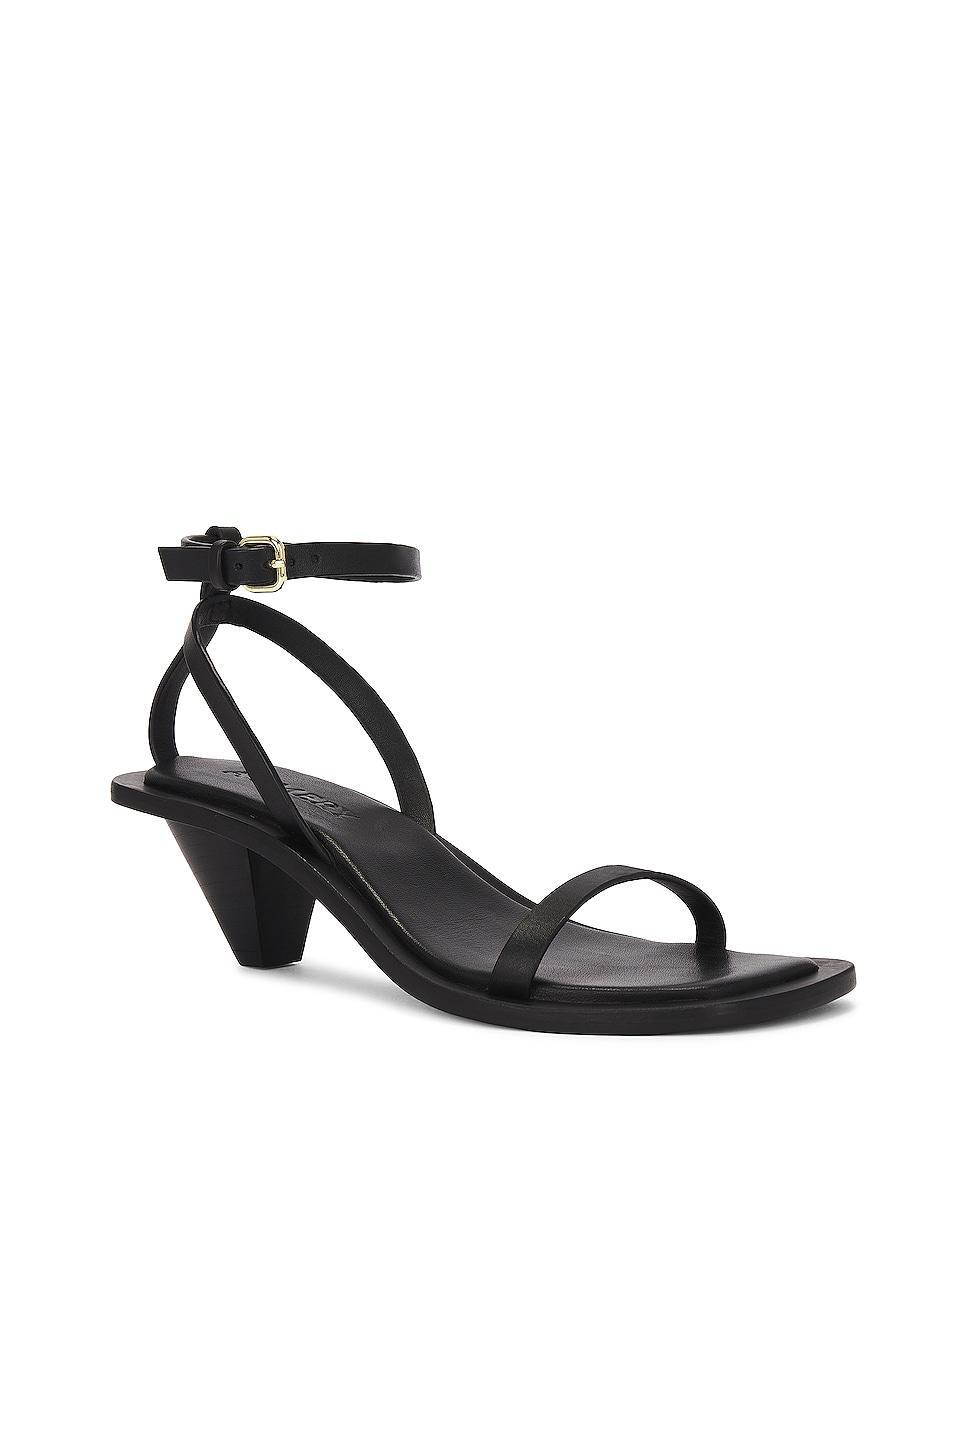 A.EMERY Irving Heeled Sandal in Black - Black. Size 38 (also in 35, 36, 37, 39, 40). Product Image